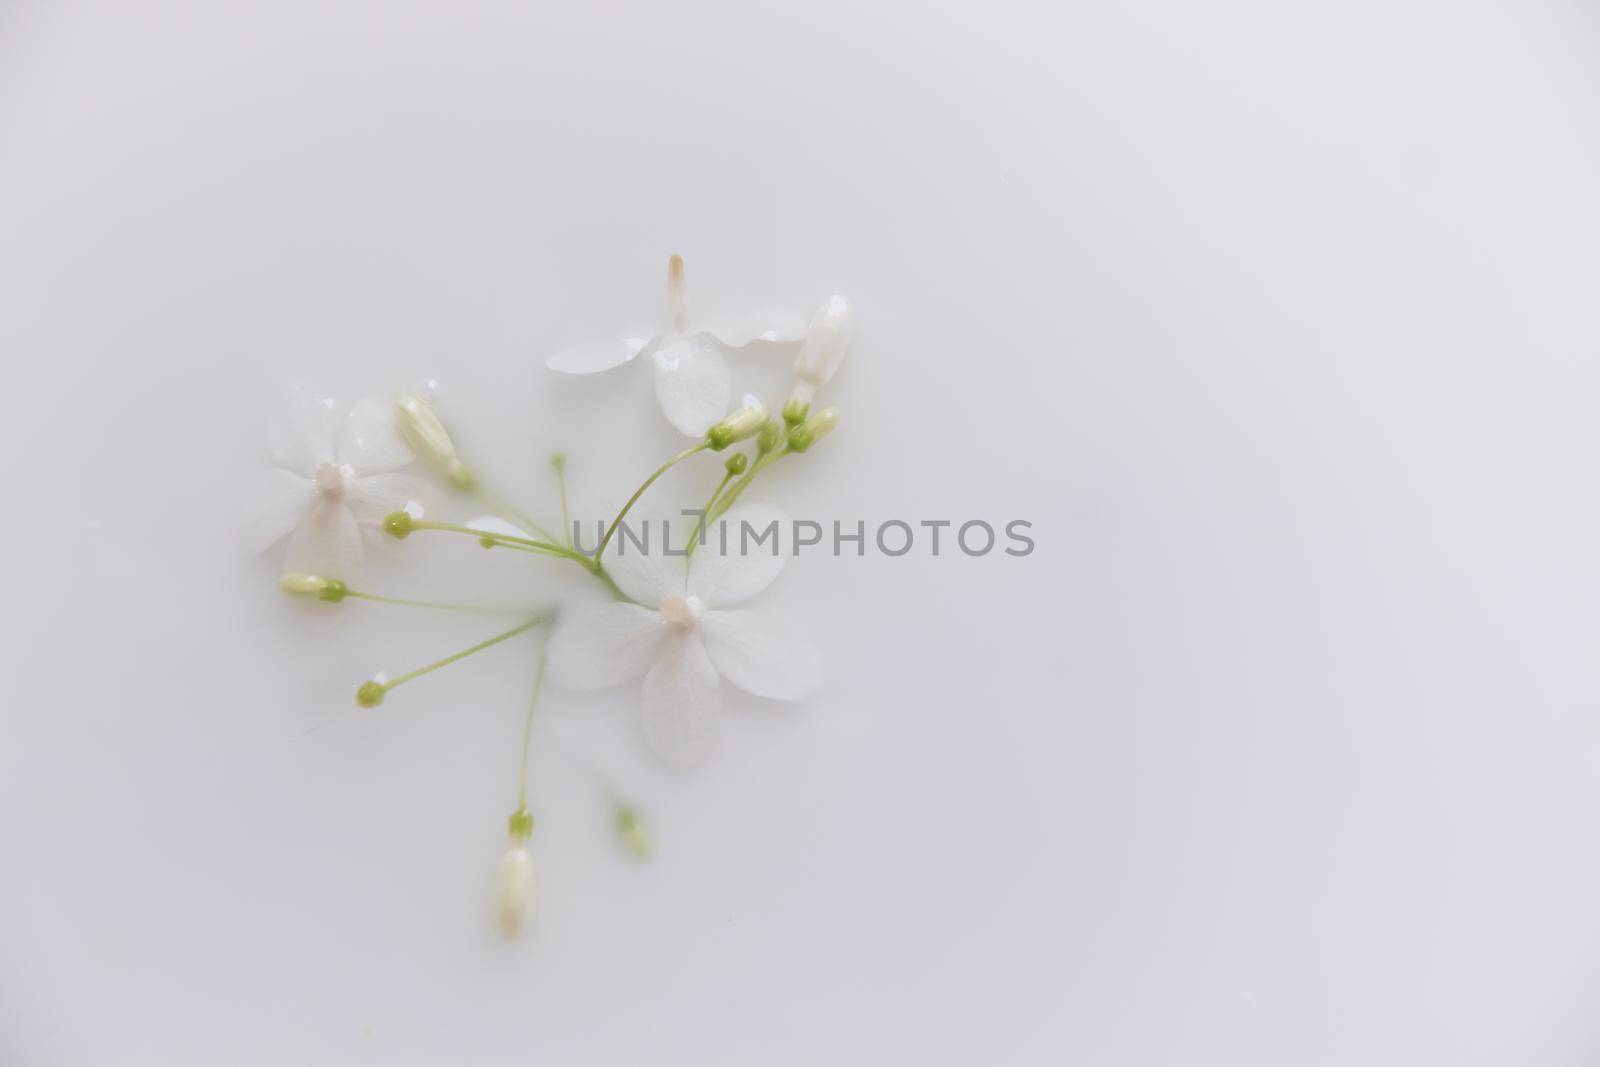 Delicate white flowers in a therapeutic milk bath to show concept of  sustainable comfort and tranquility of the Springtime